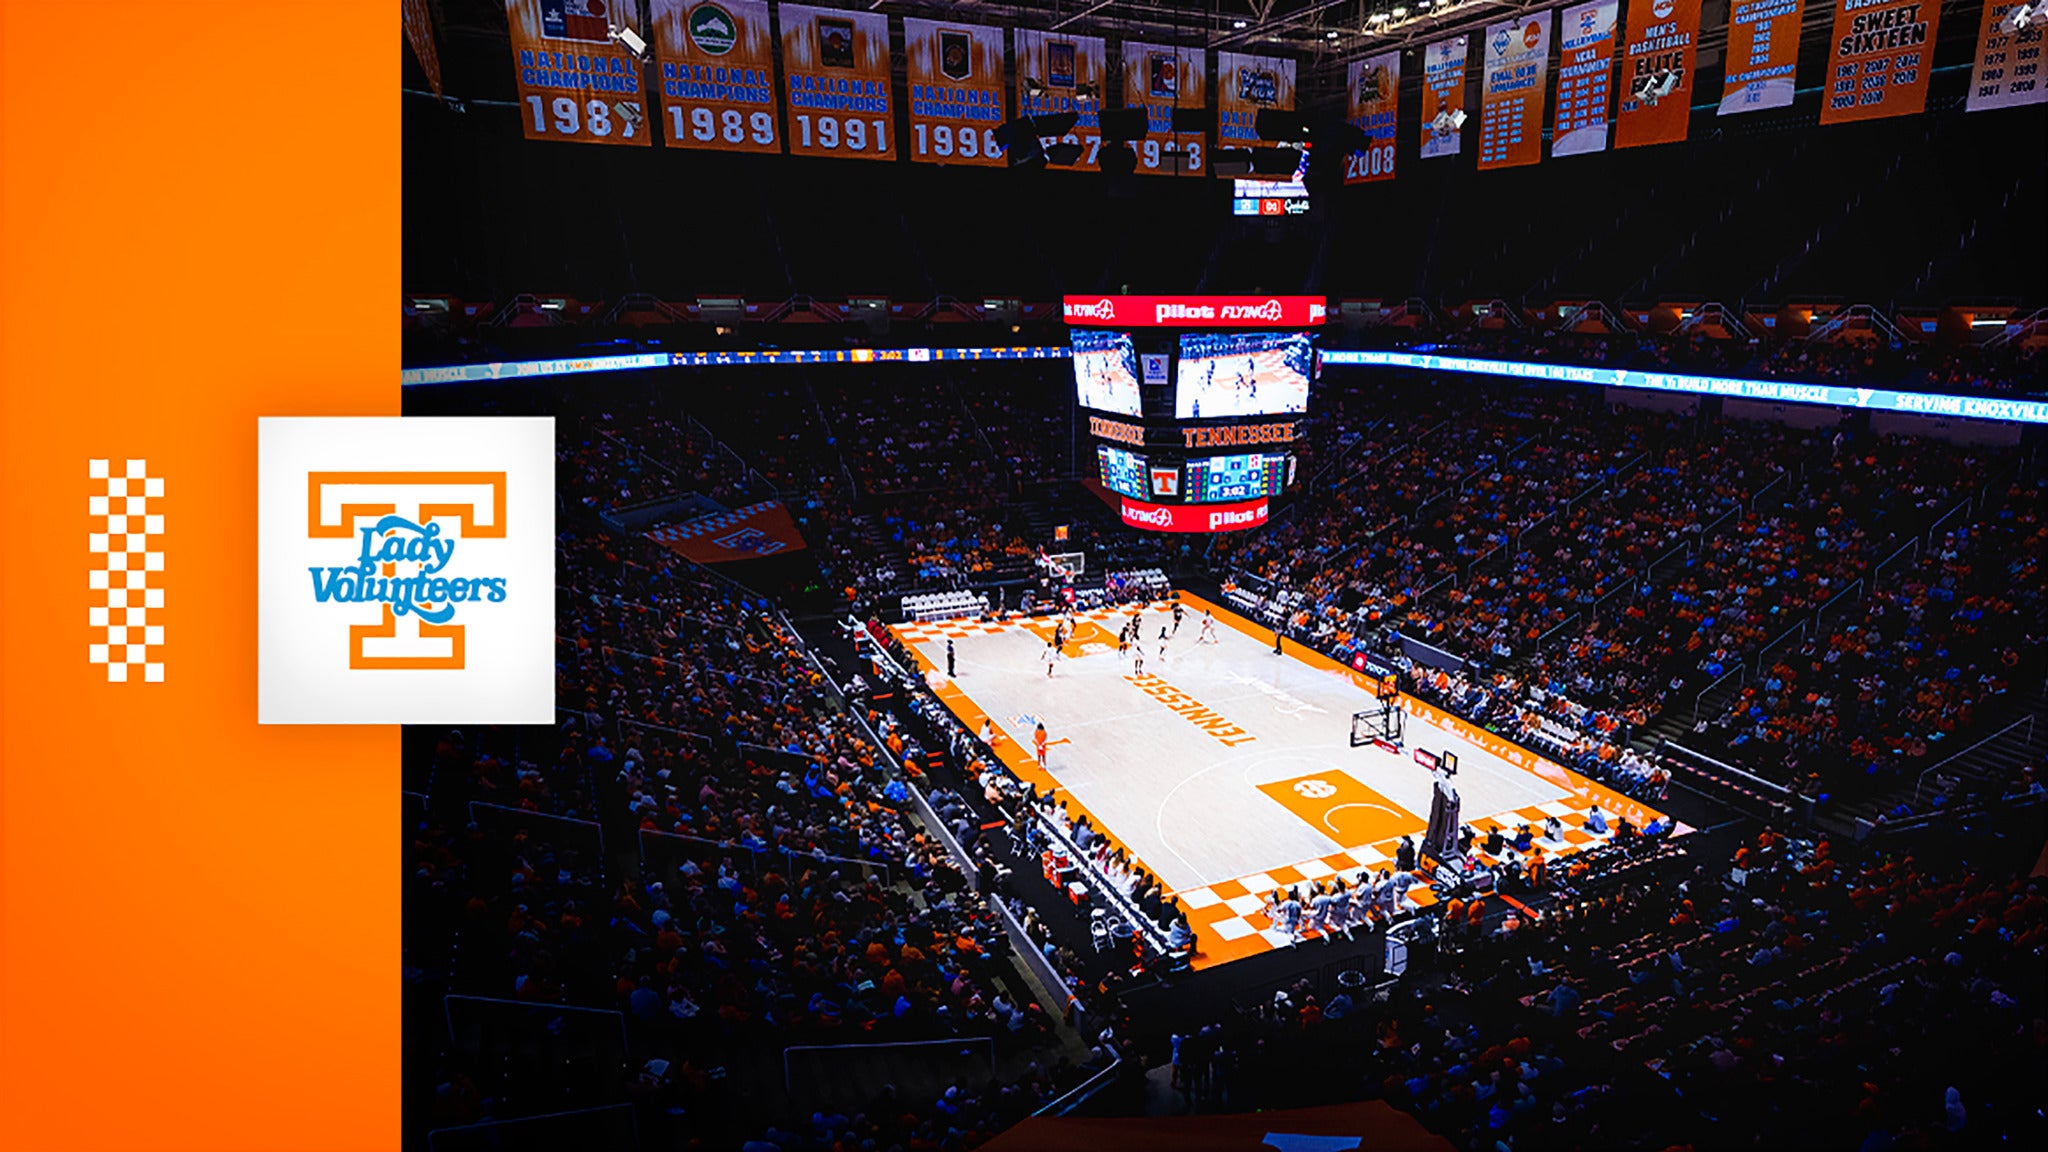 Tennessee Lady Volunteers Women's Basketball vs. Virginia Tech Hokies Womens Basketball in Knoxville promo photo for Season presale offer code